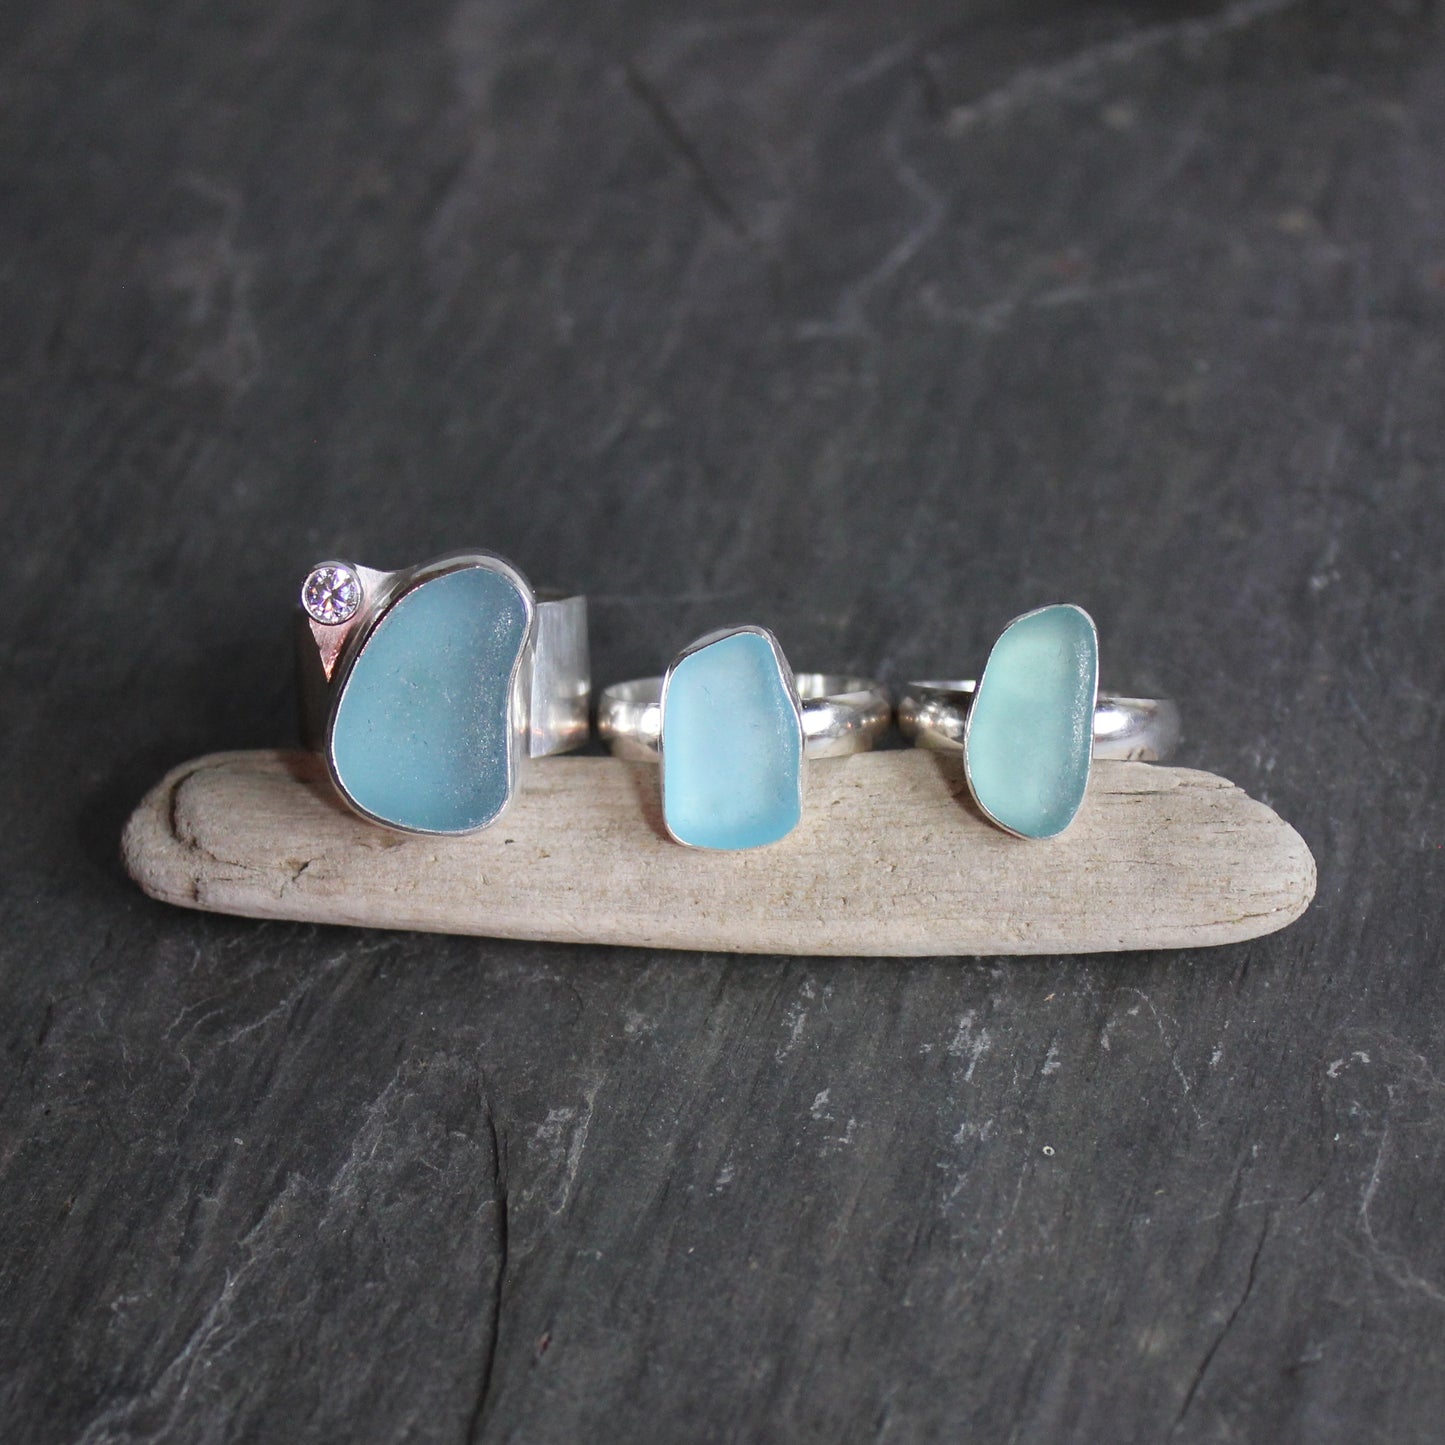 A set of 3 Aqua blue sea glass rings set in fine & sterling silver. Accent Yourself specializes in sterling silver jewelry handmade by Barb Macy & Will Macy in Corvallis, OR.